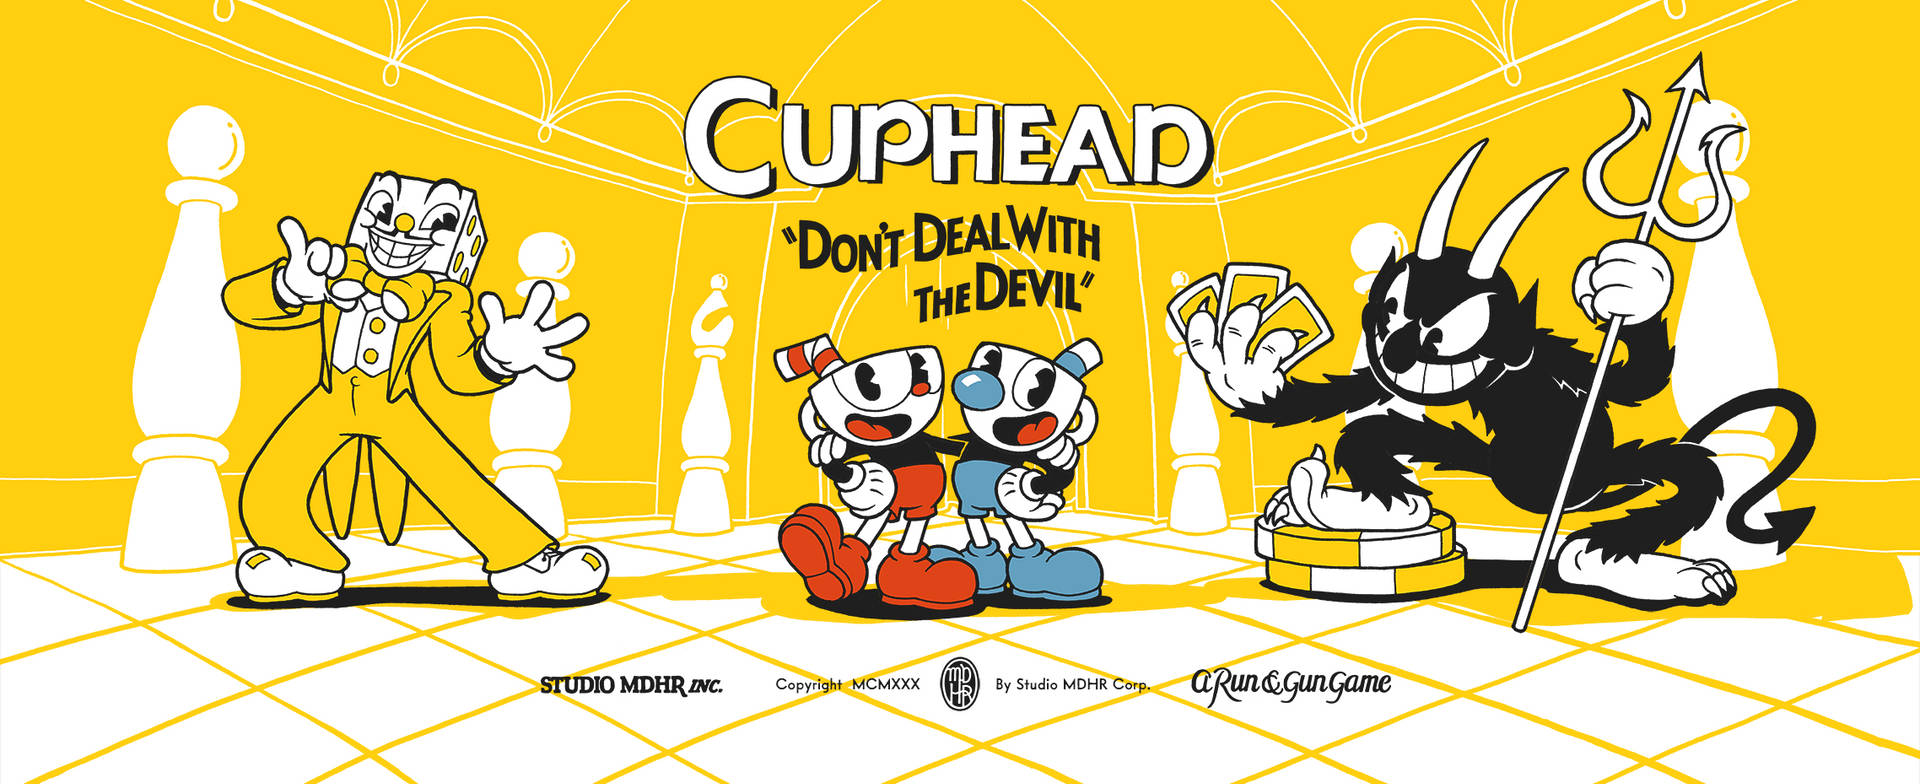 Ready For An Adventure? Take A Trip With Cuphead! Wallpaper